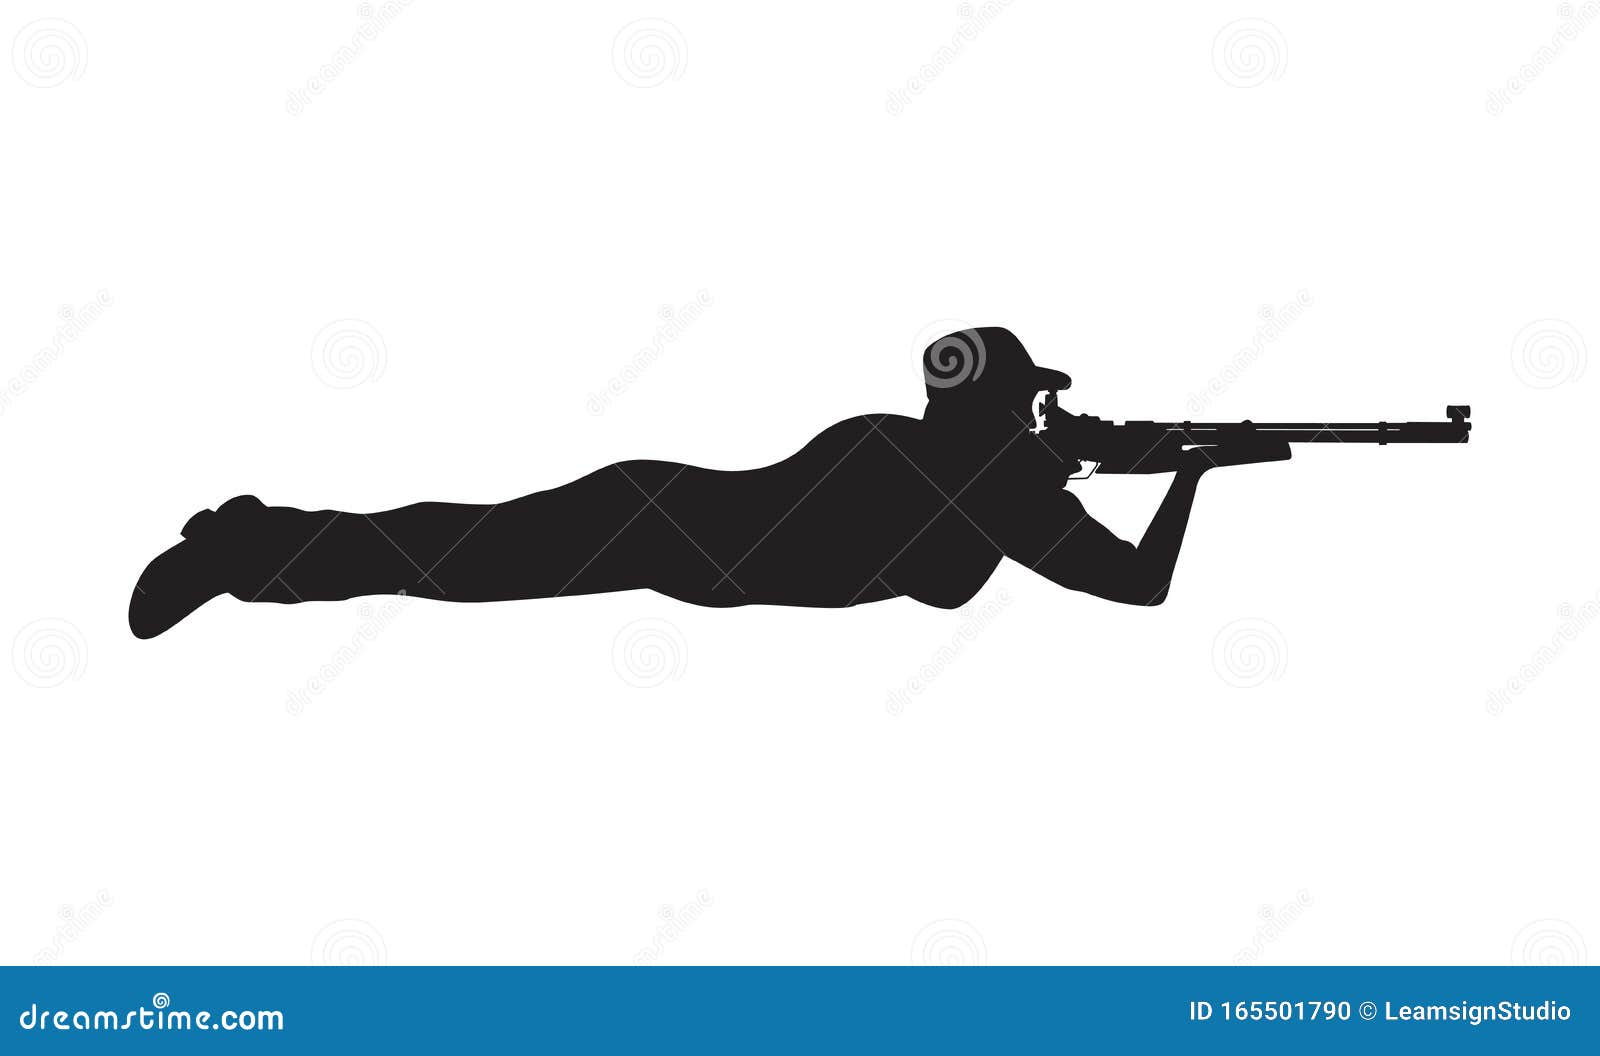 shooter prone position